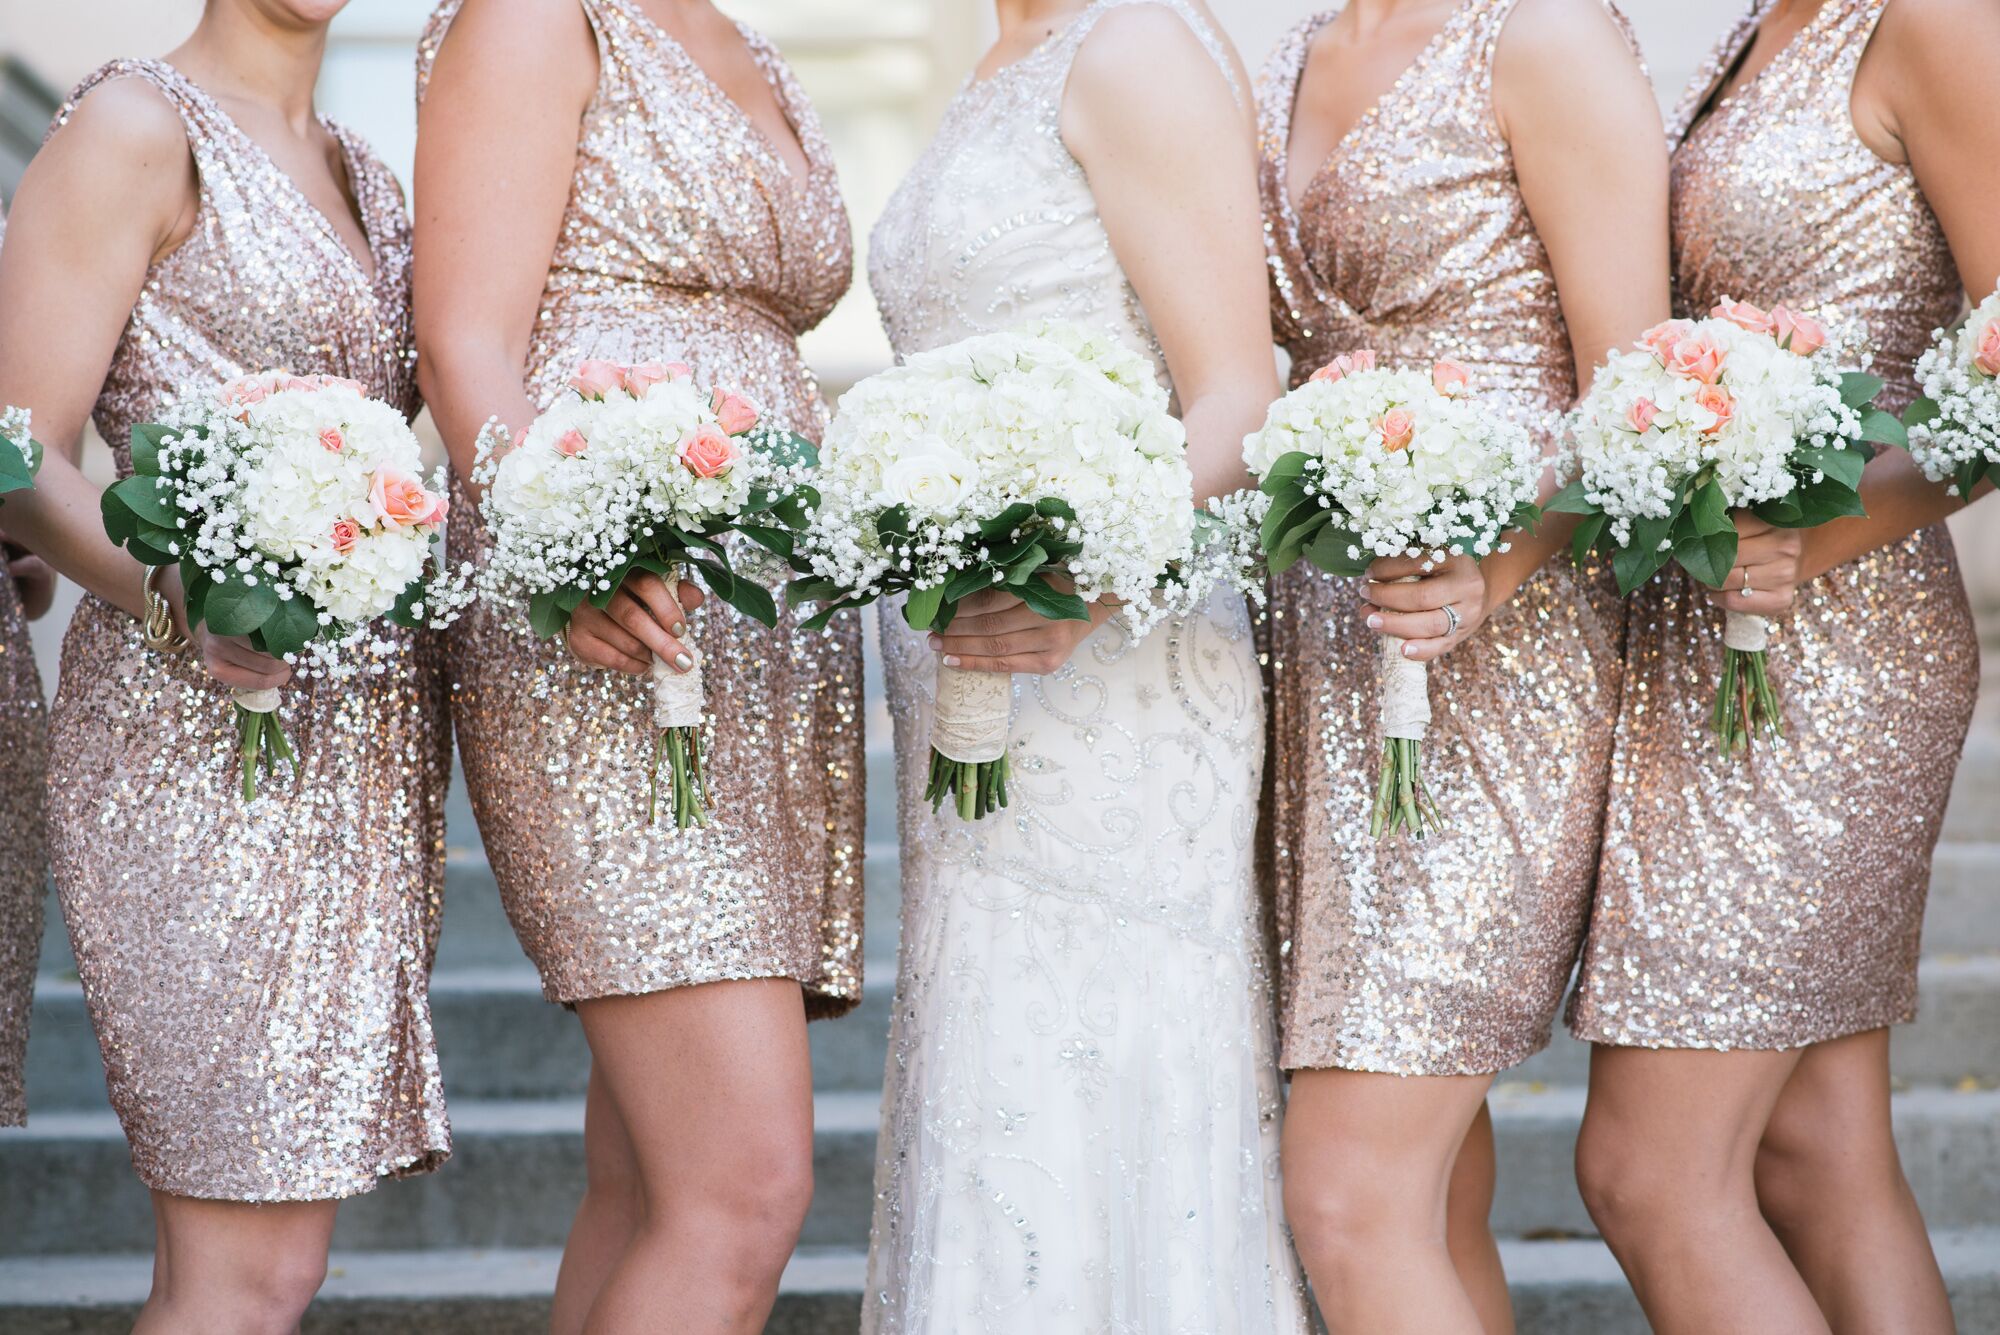 Sequin Bridesmaid Dresses from Rent the Runway